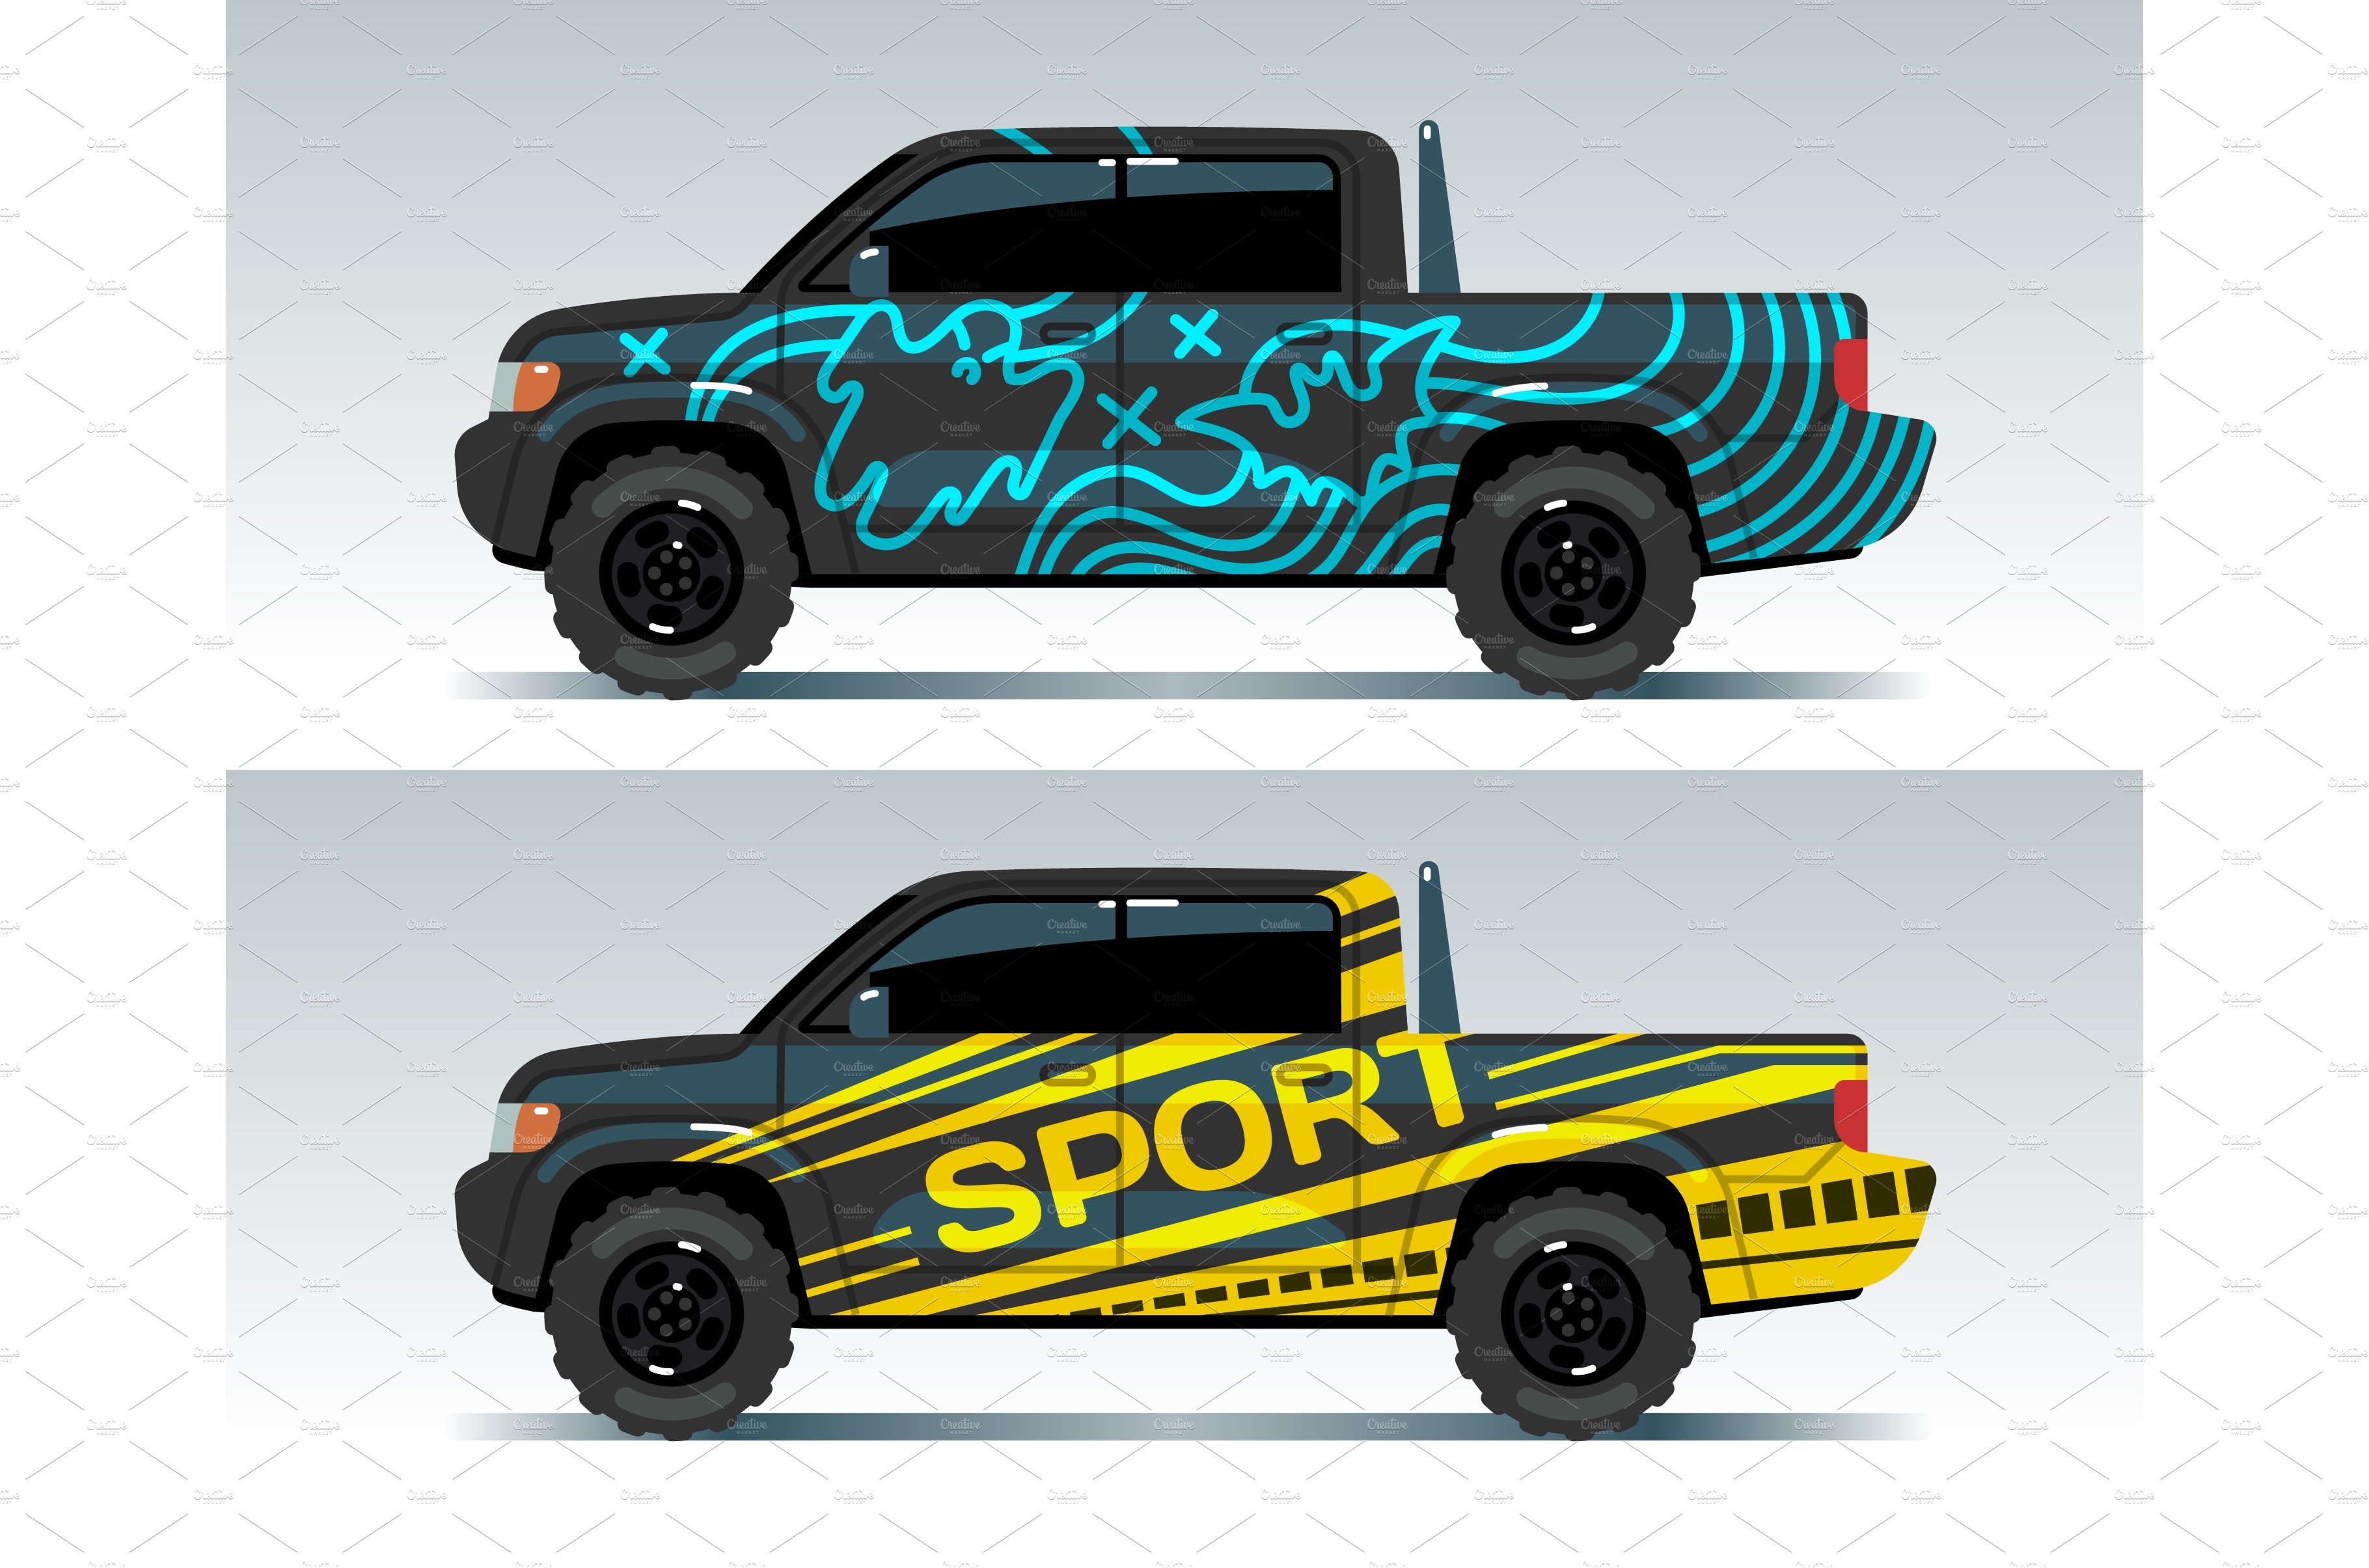 Racing car graphic. Truck wrapping cover image.